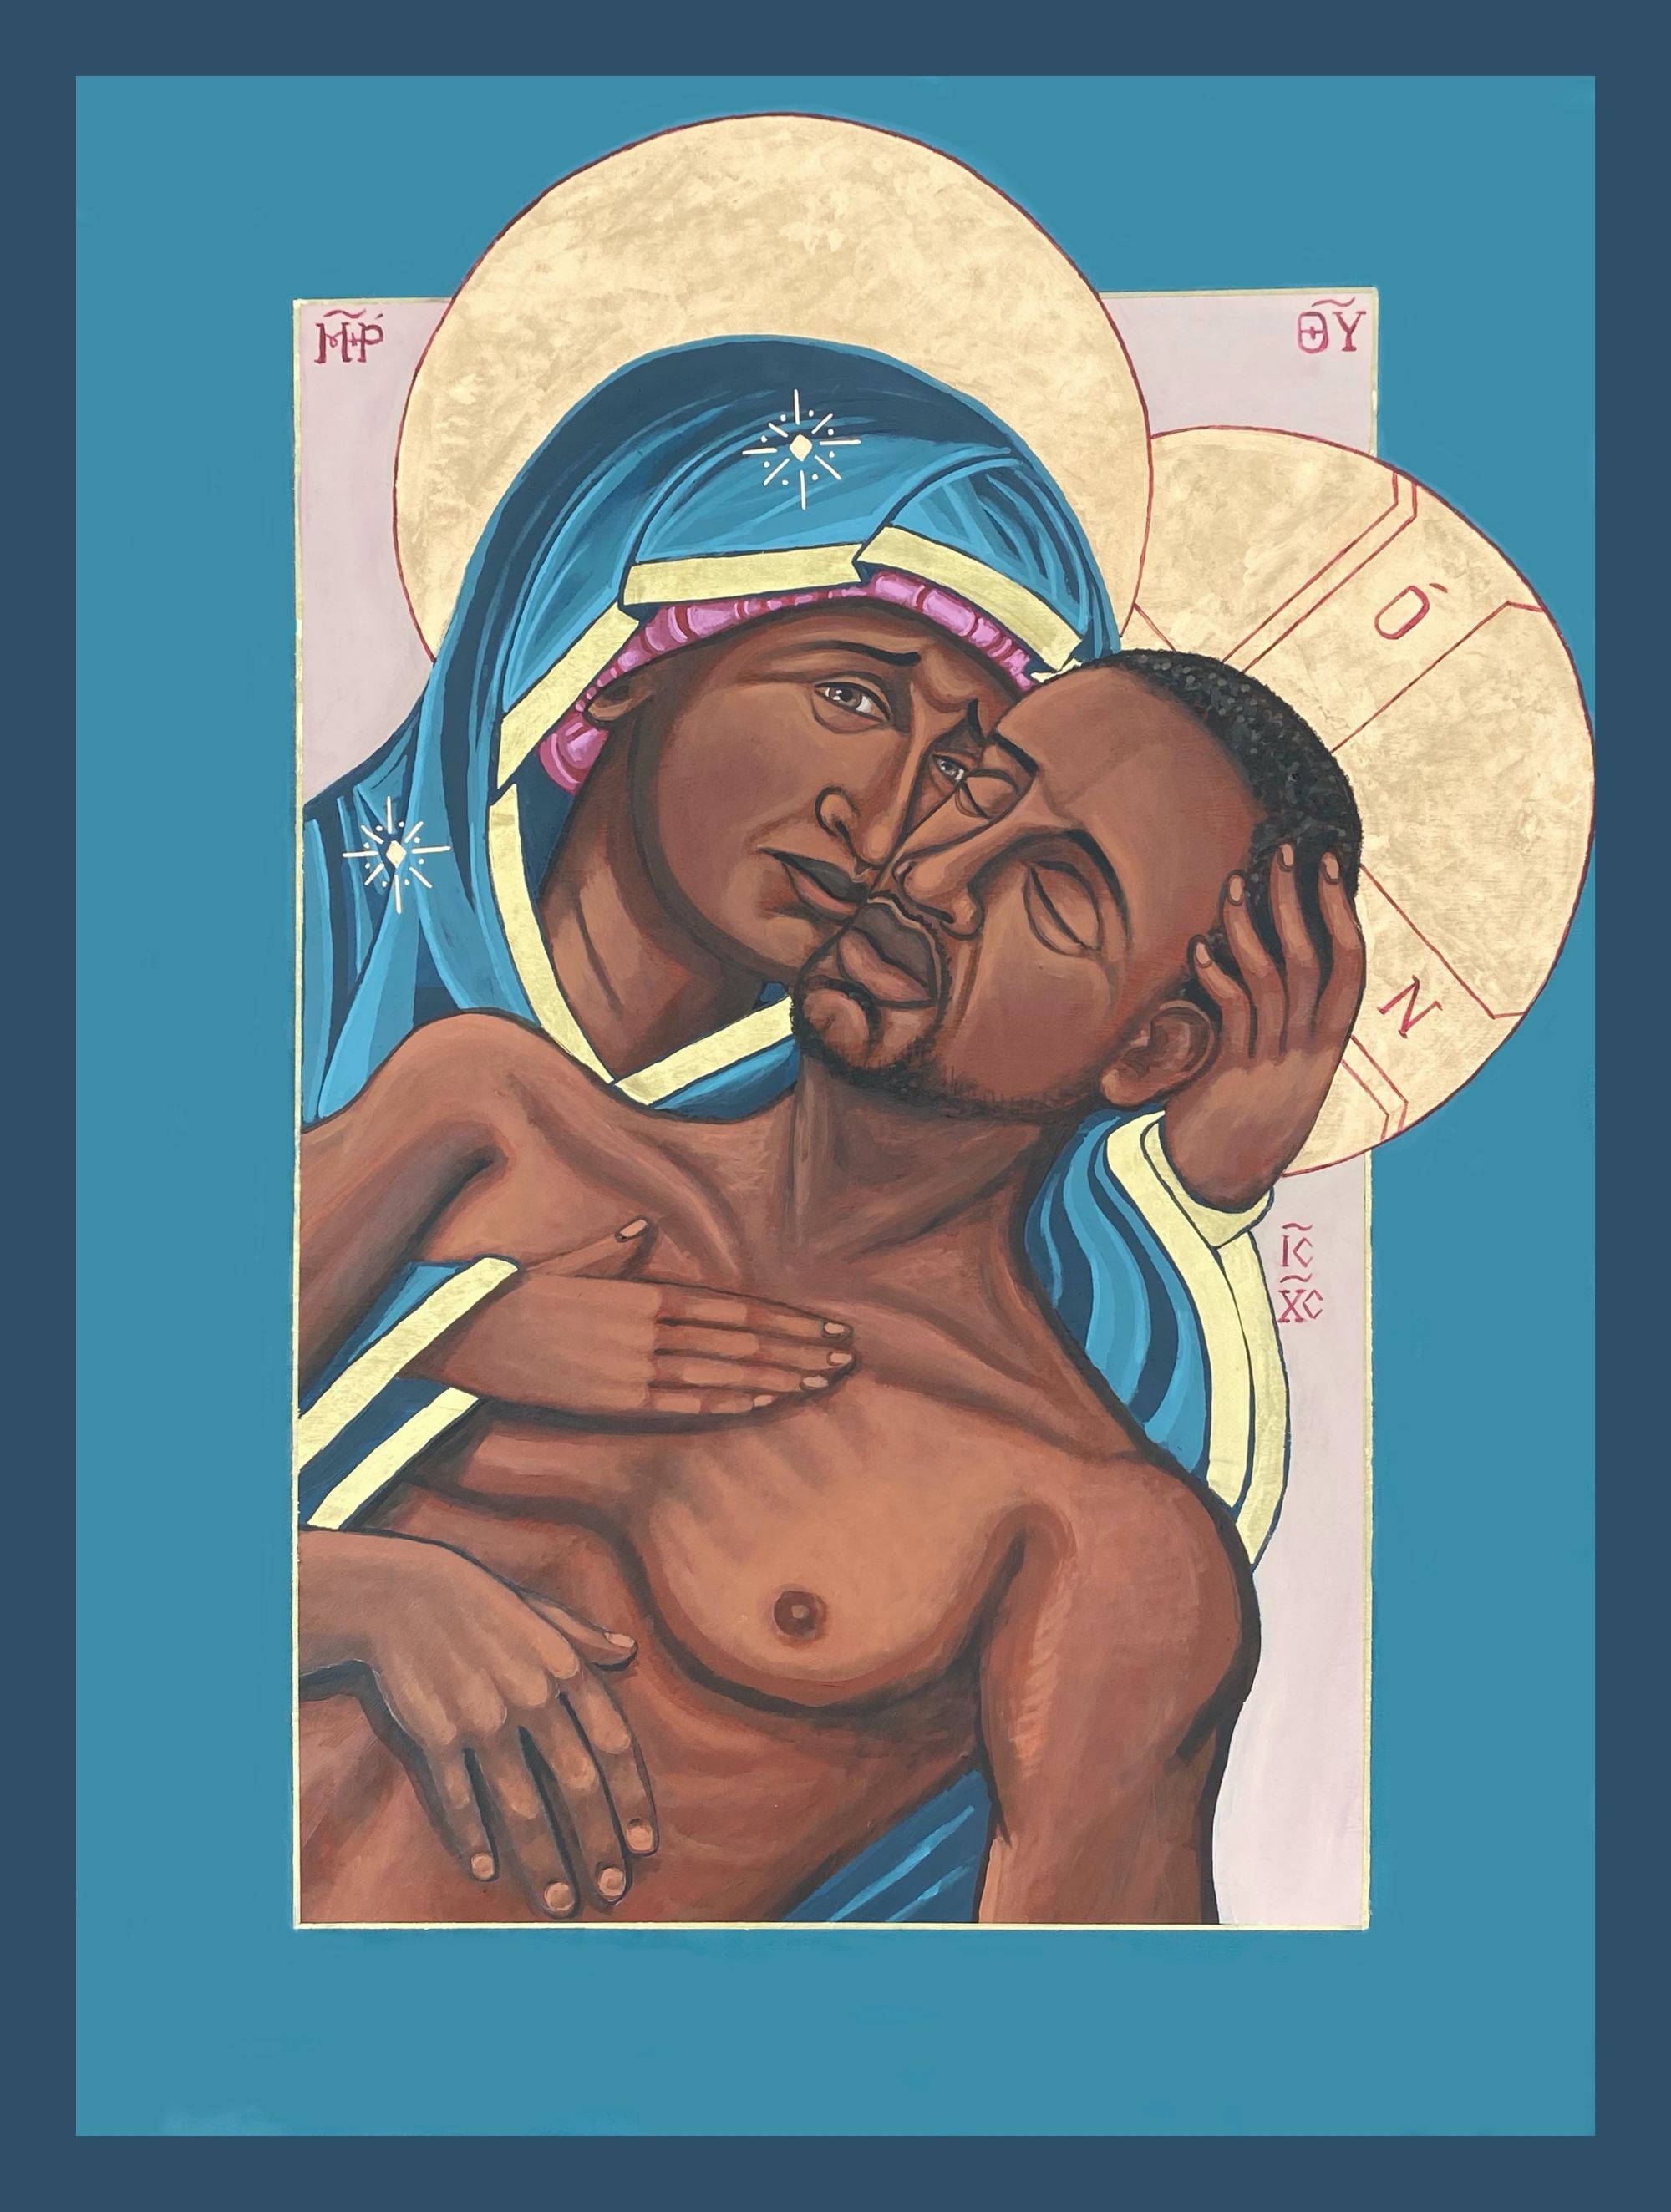 George Floyd icon stolen from Catholic University of America, minimized by administration